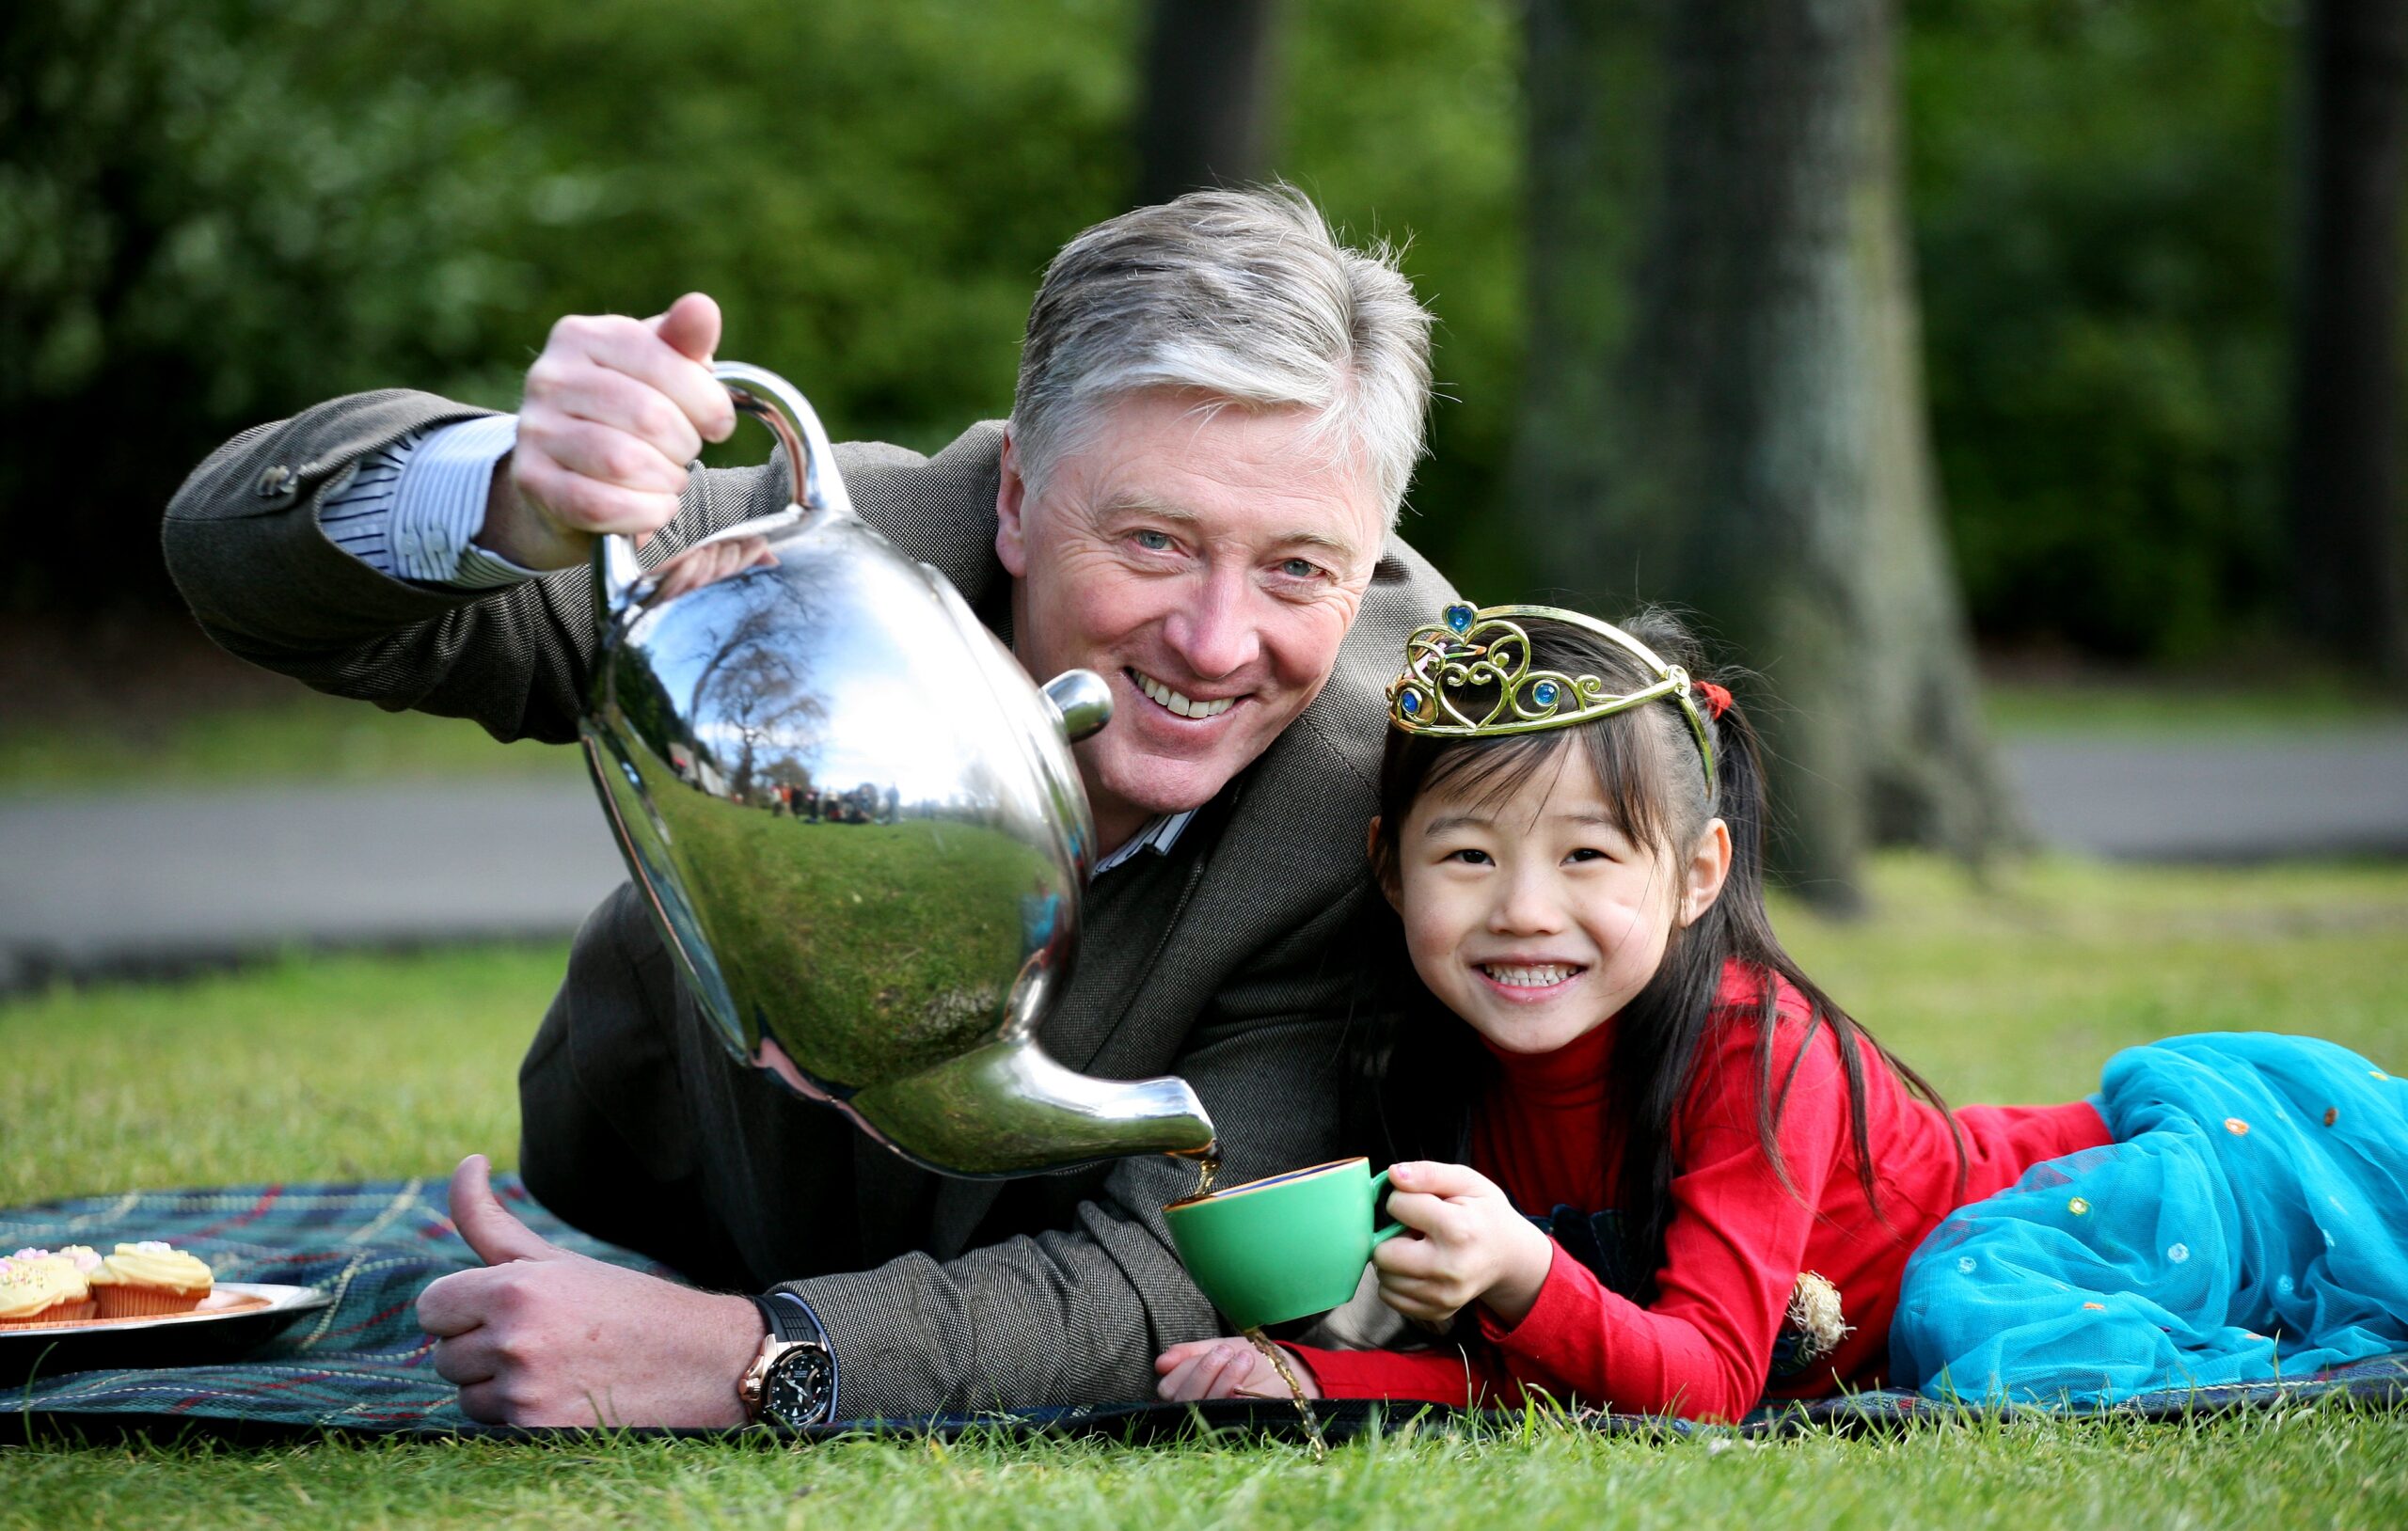 Pat Kenny pours a cup of tea for a girl